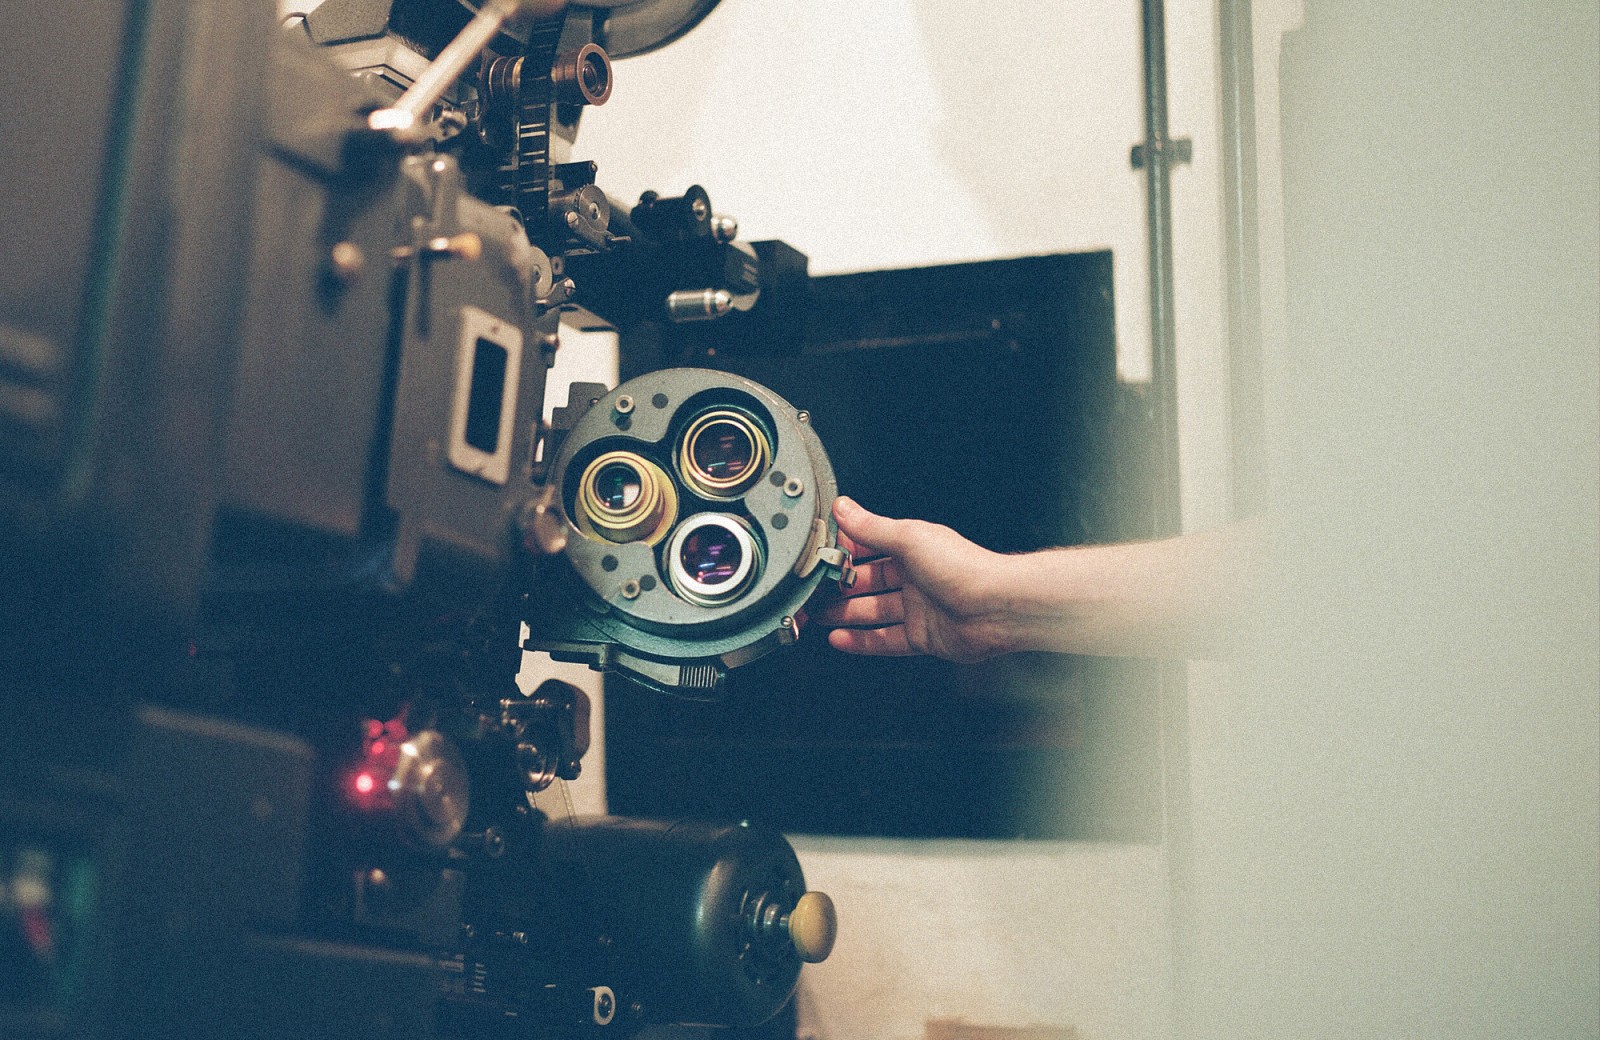 35mm projector. Photo by Tom Morris